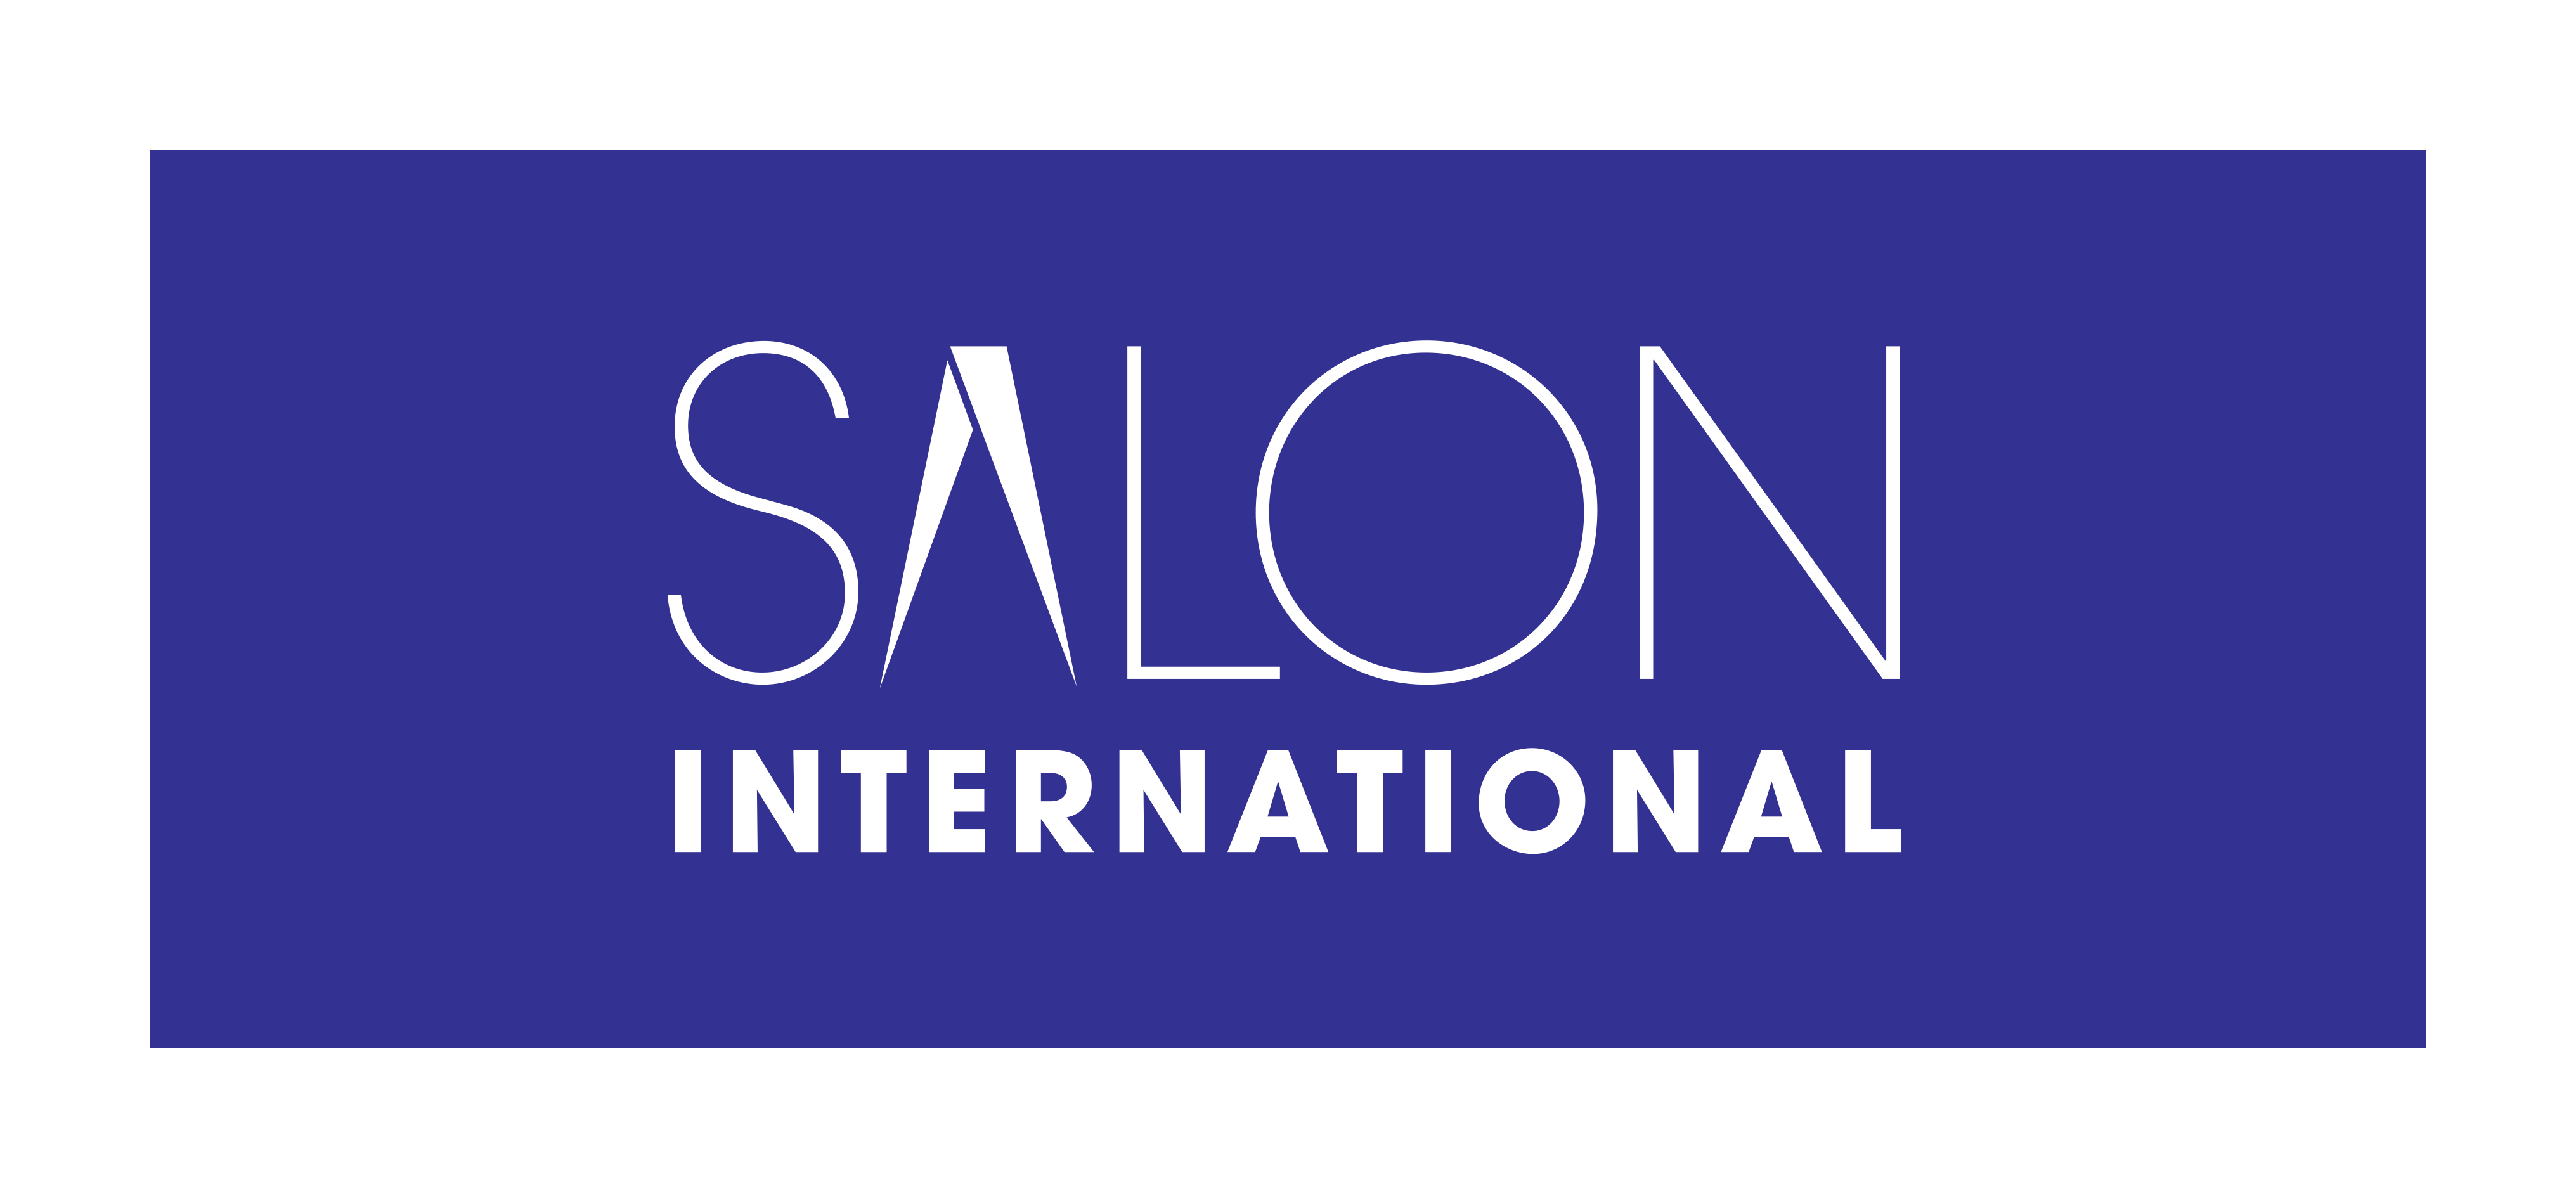 Event 3 – Retail Supports 2023 – Salon International 2023, London – 14th-15th October 2023 